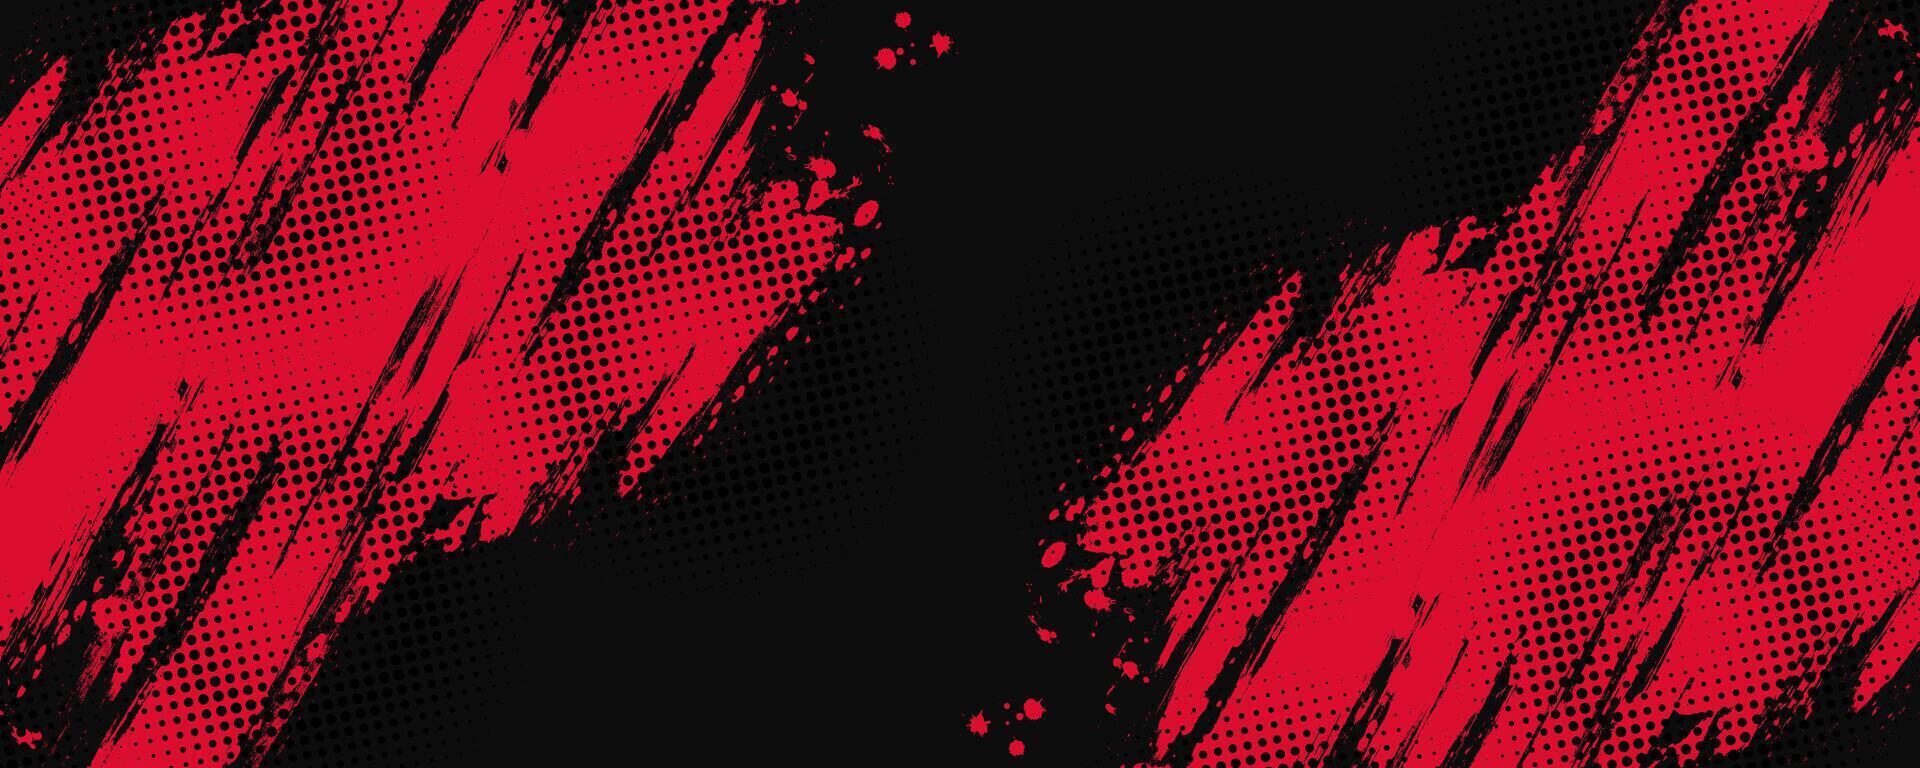 Abstract Red and Black Dirty Grunge Background with Halftone Effect. Sports Background with Brush Stroke Illustration vector